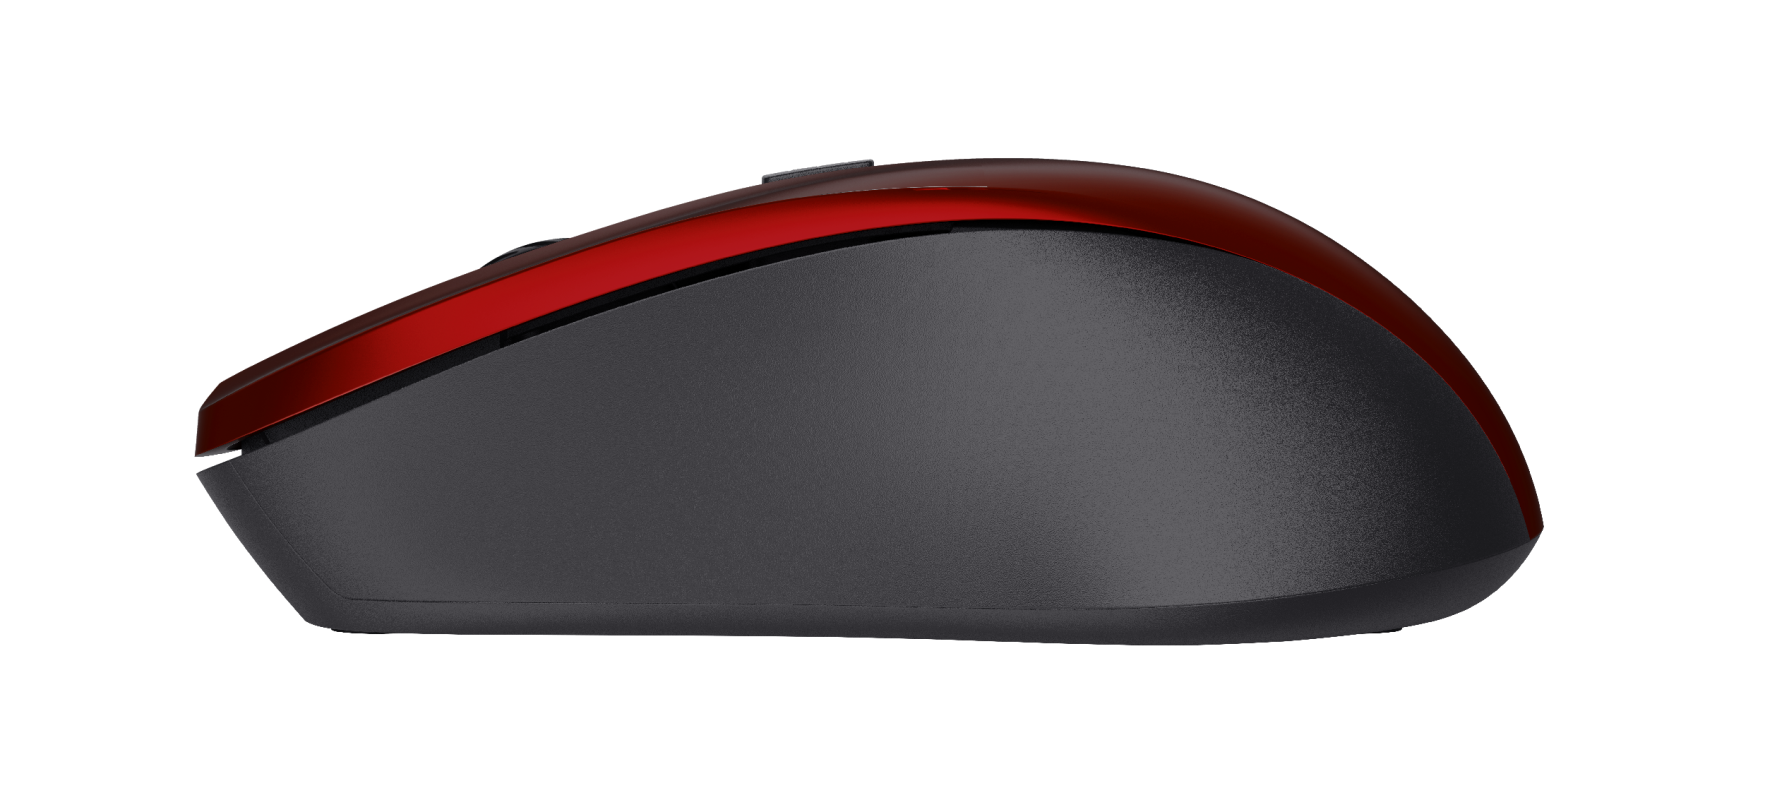 Mydo Silent Click Wireless Mouse - red-Side